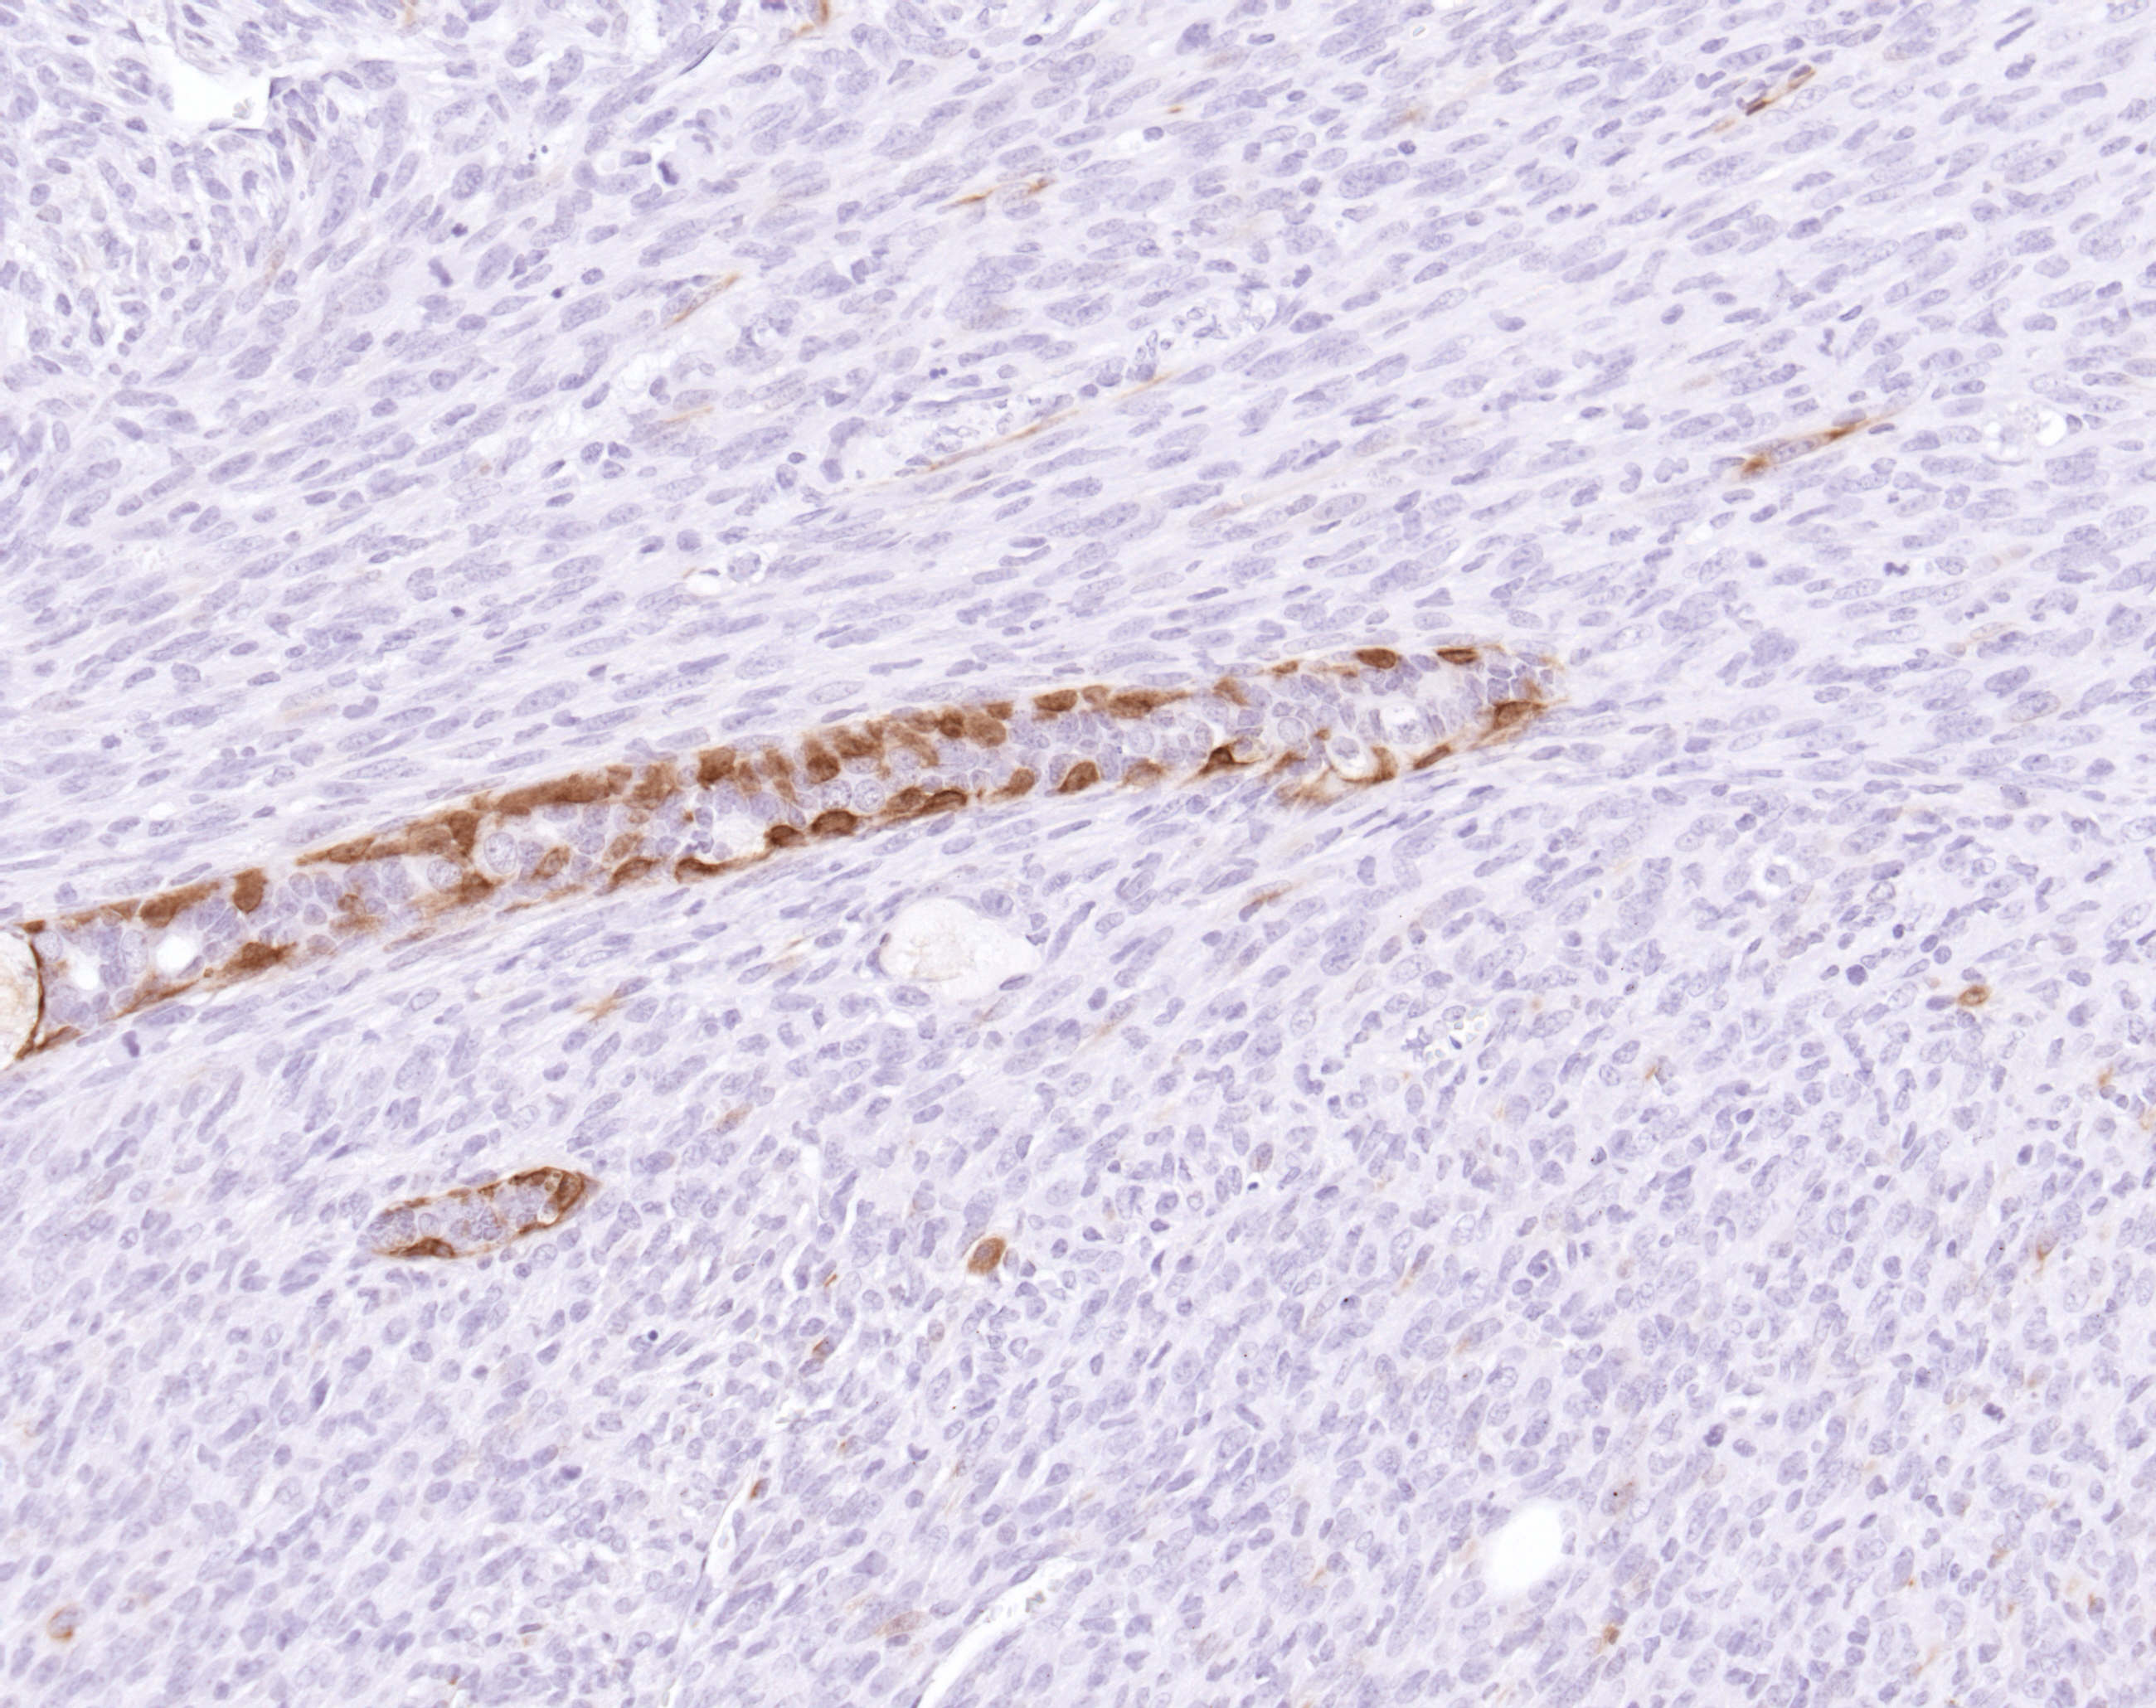 Epithelial to Mesenchymal (EMT) tumor with vestiges of CK14+ve epithelial tumor cells